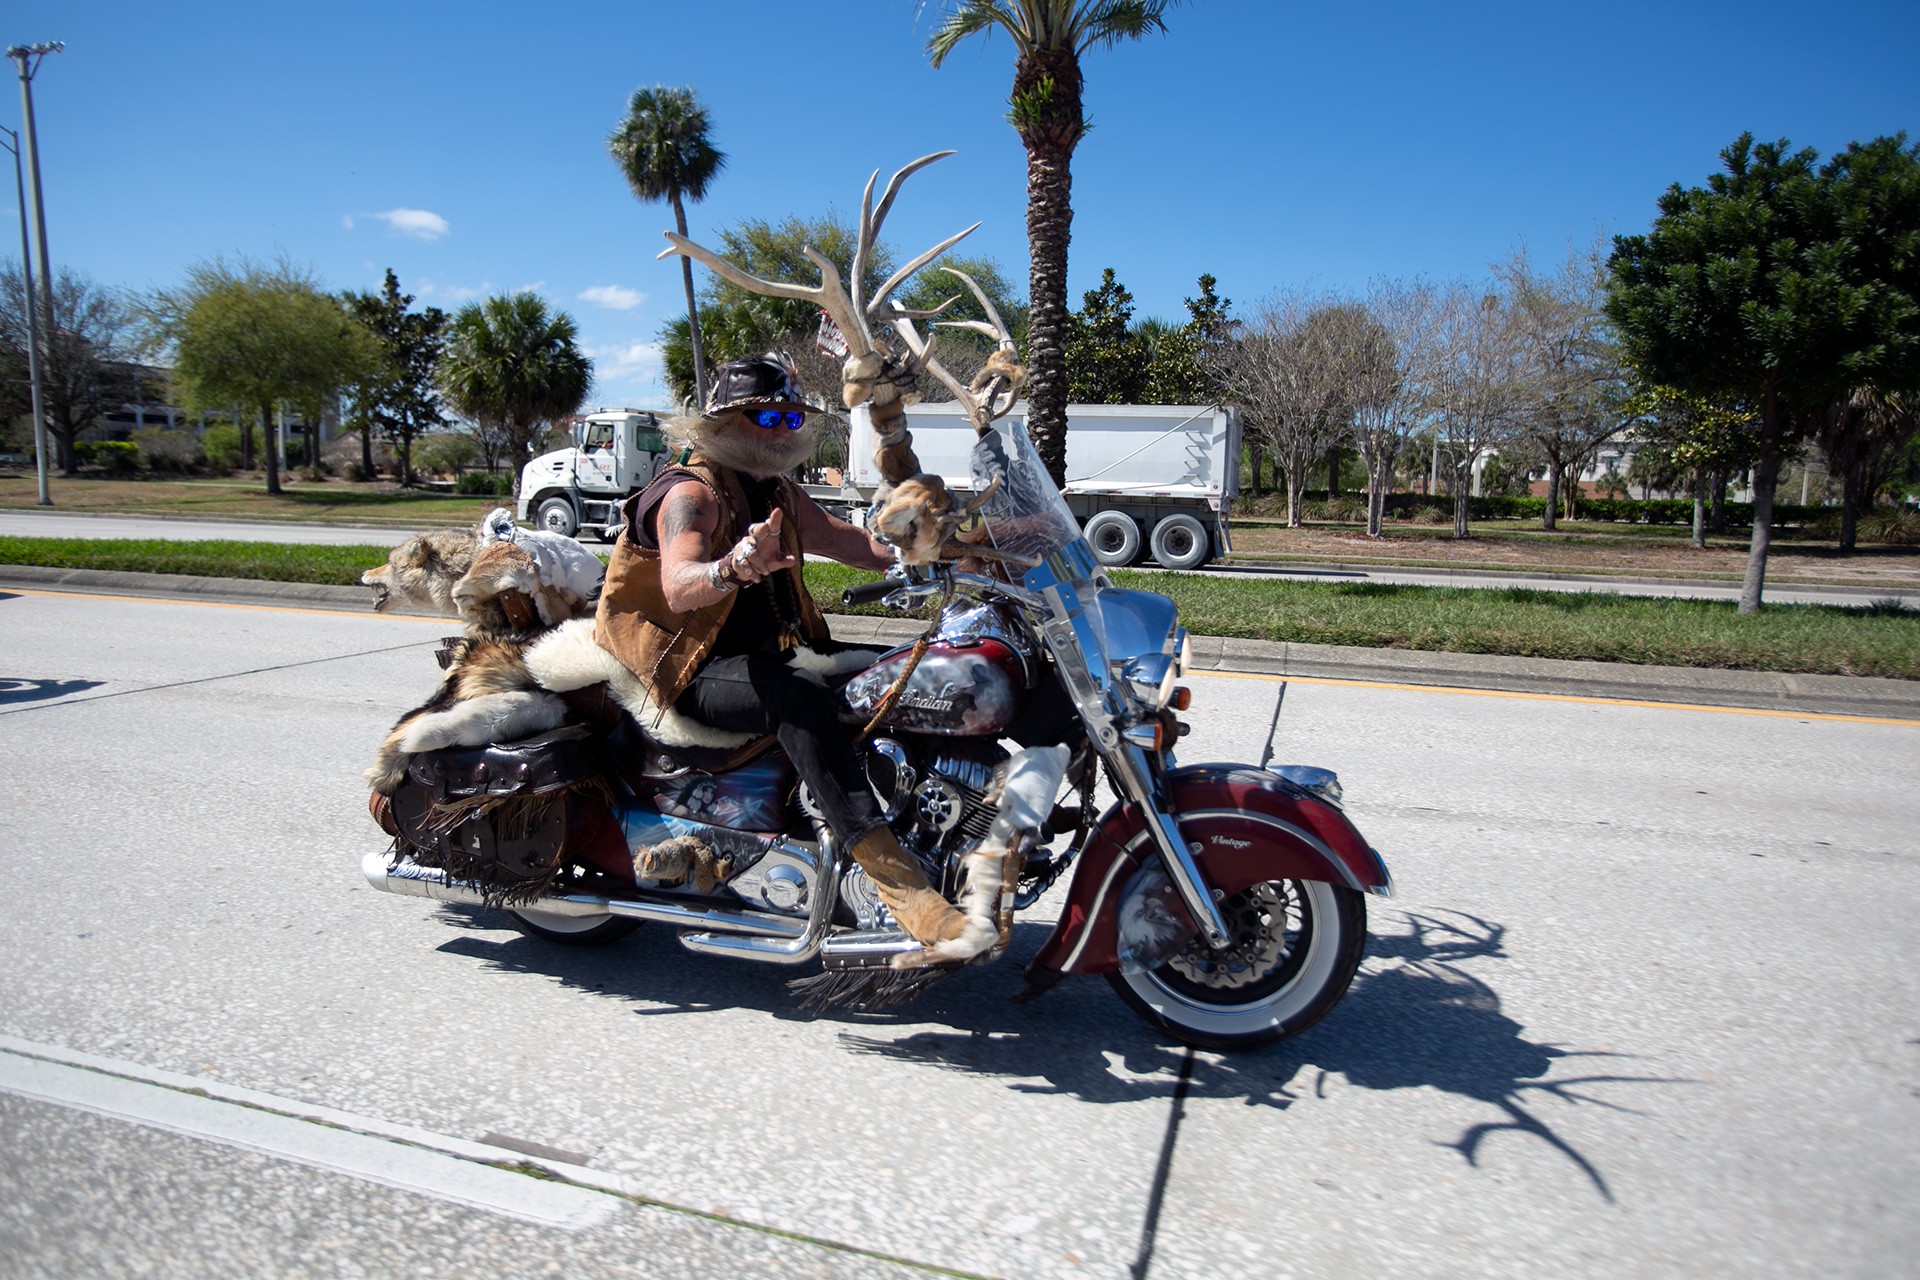 A uniquely decorated Indian motorcycle cruising by the Daytona International Speedway